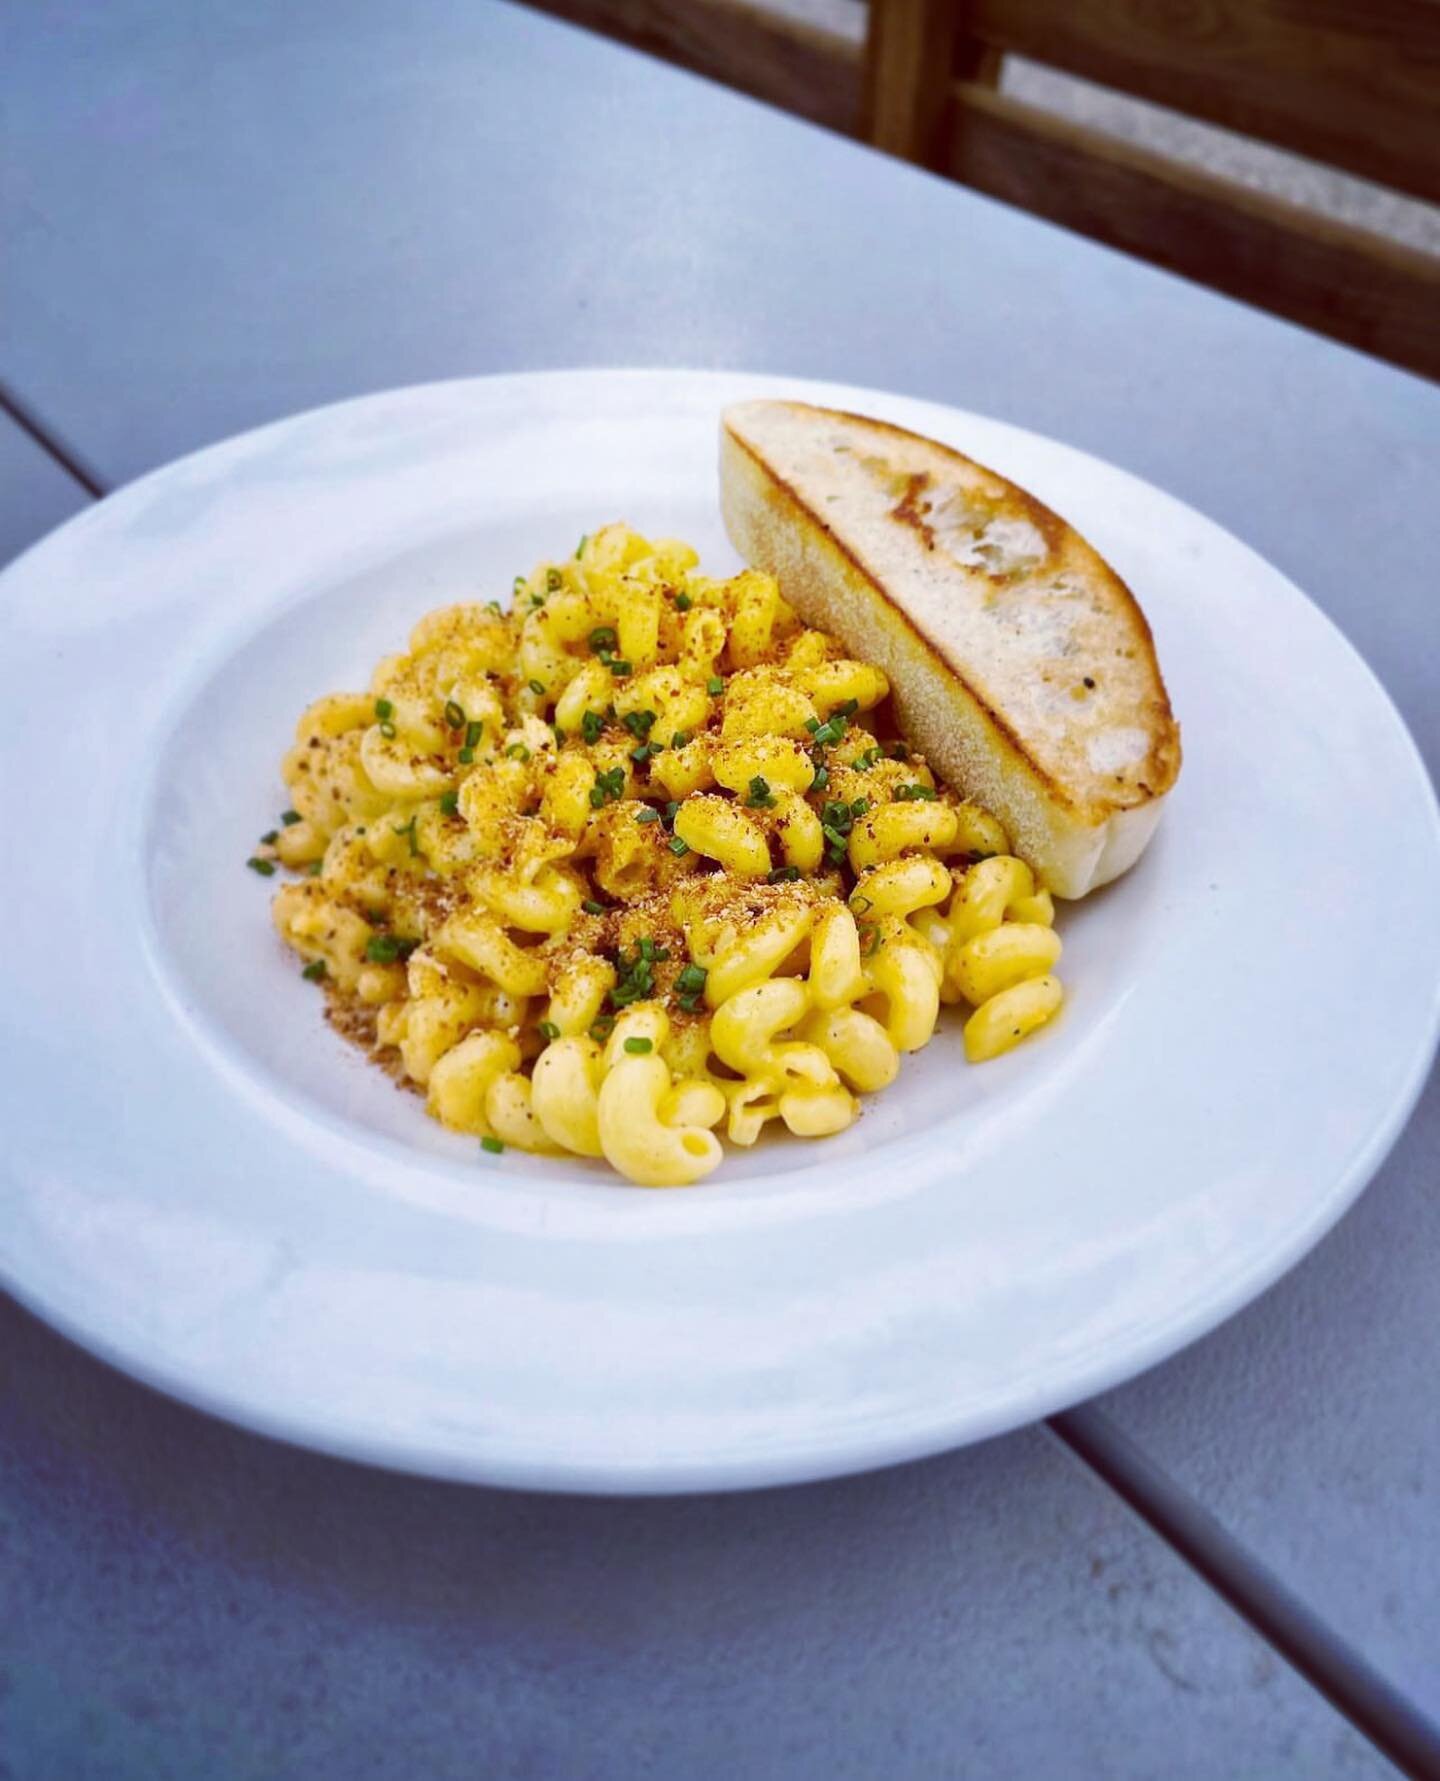 Mac &amp; Cheese on special this weekend! Add Pork Belly, Smoked Salmon, Bacon, Pickled Chilis, Chicken, Broccolini or whatever your heart desires!

#lakeeffectrestaurant #islandlake #macncheese